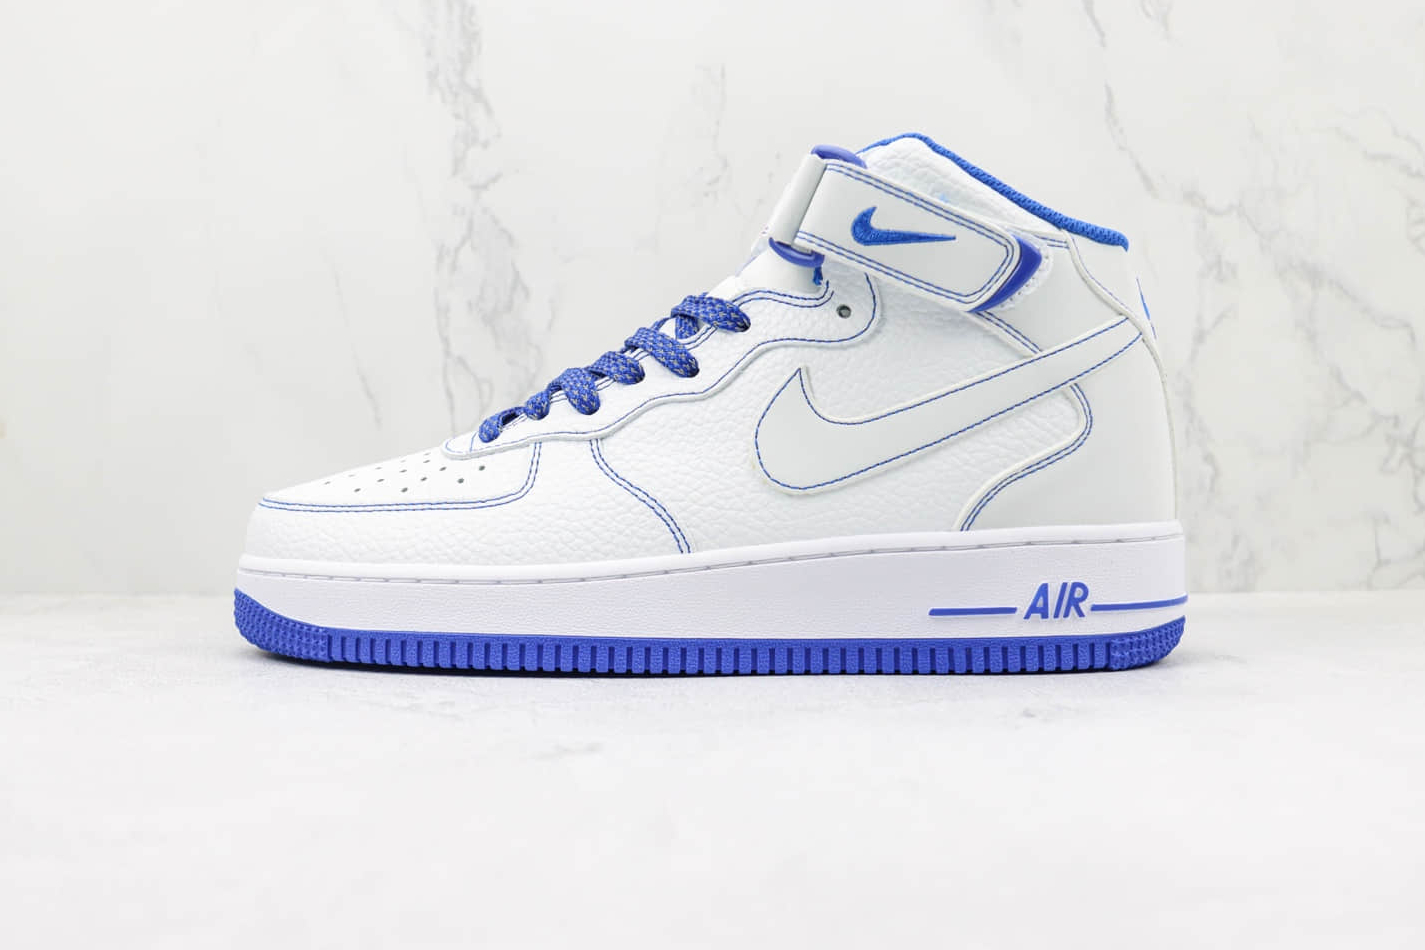 Nike Air Force 1 07 Mid Navy Blue White MK0619-233 - Classic Style with a Modern Twist